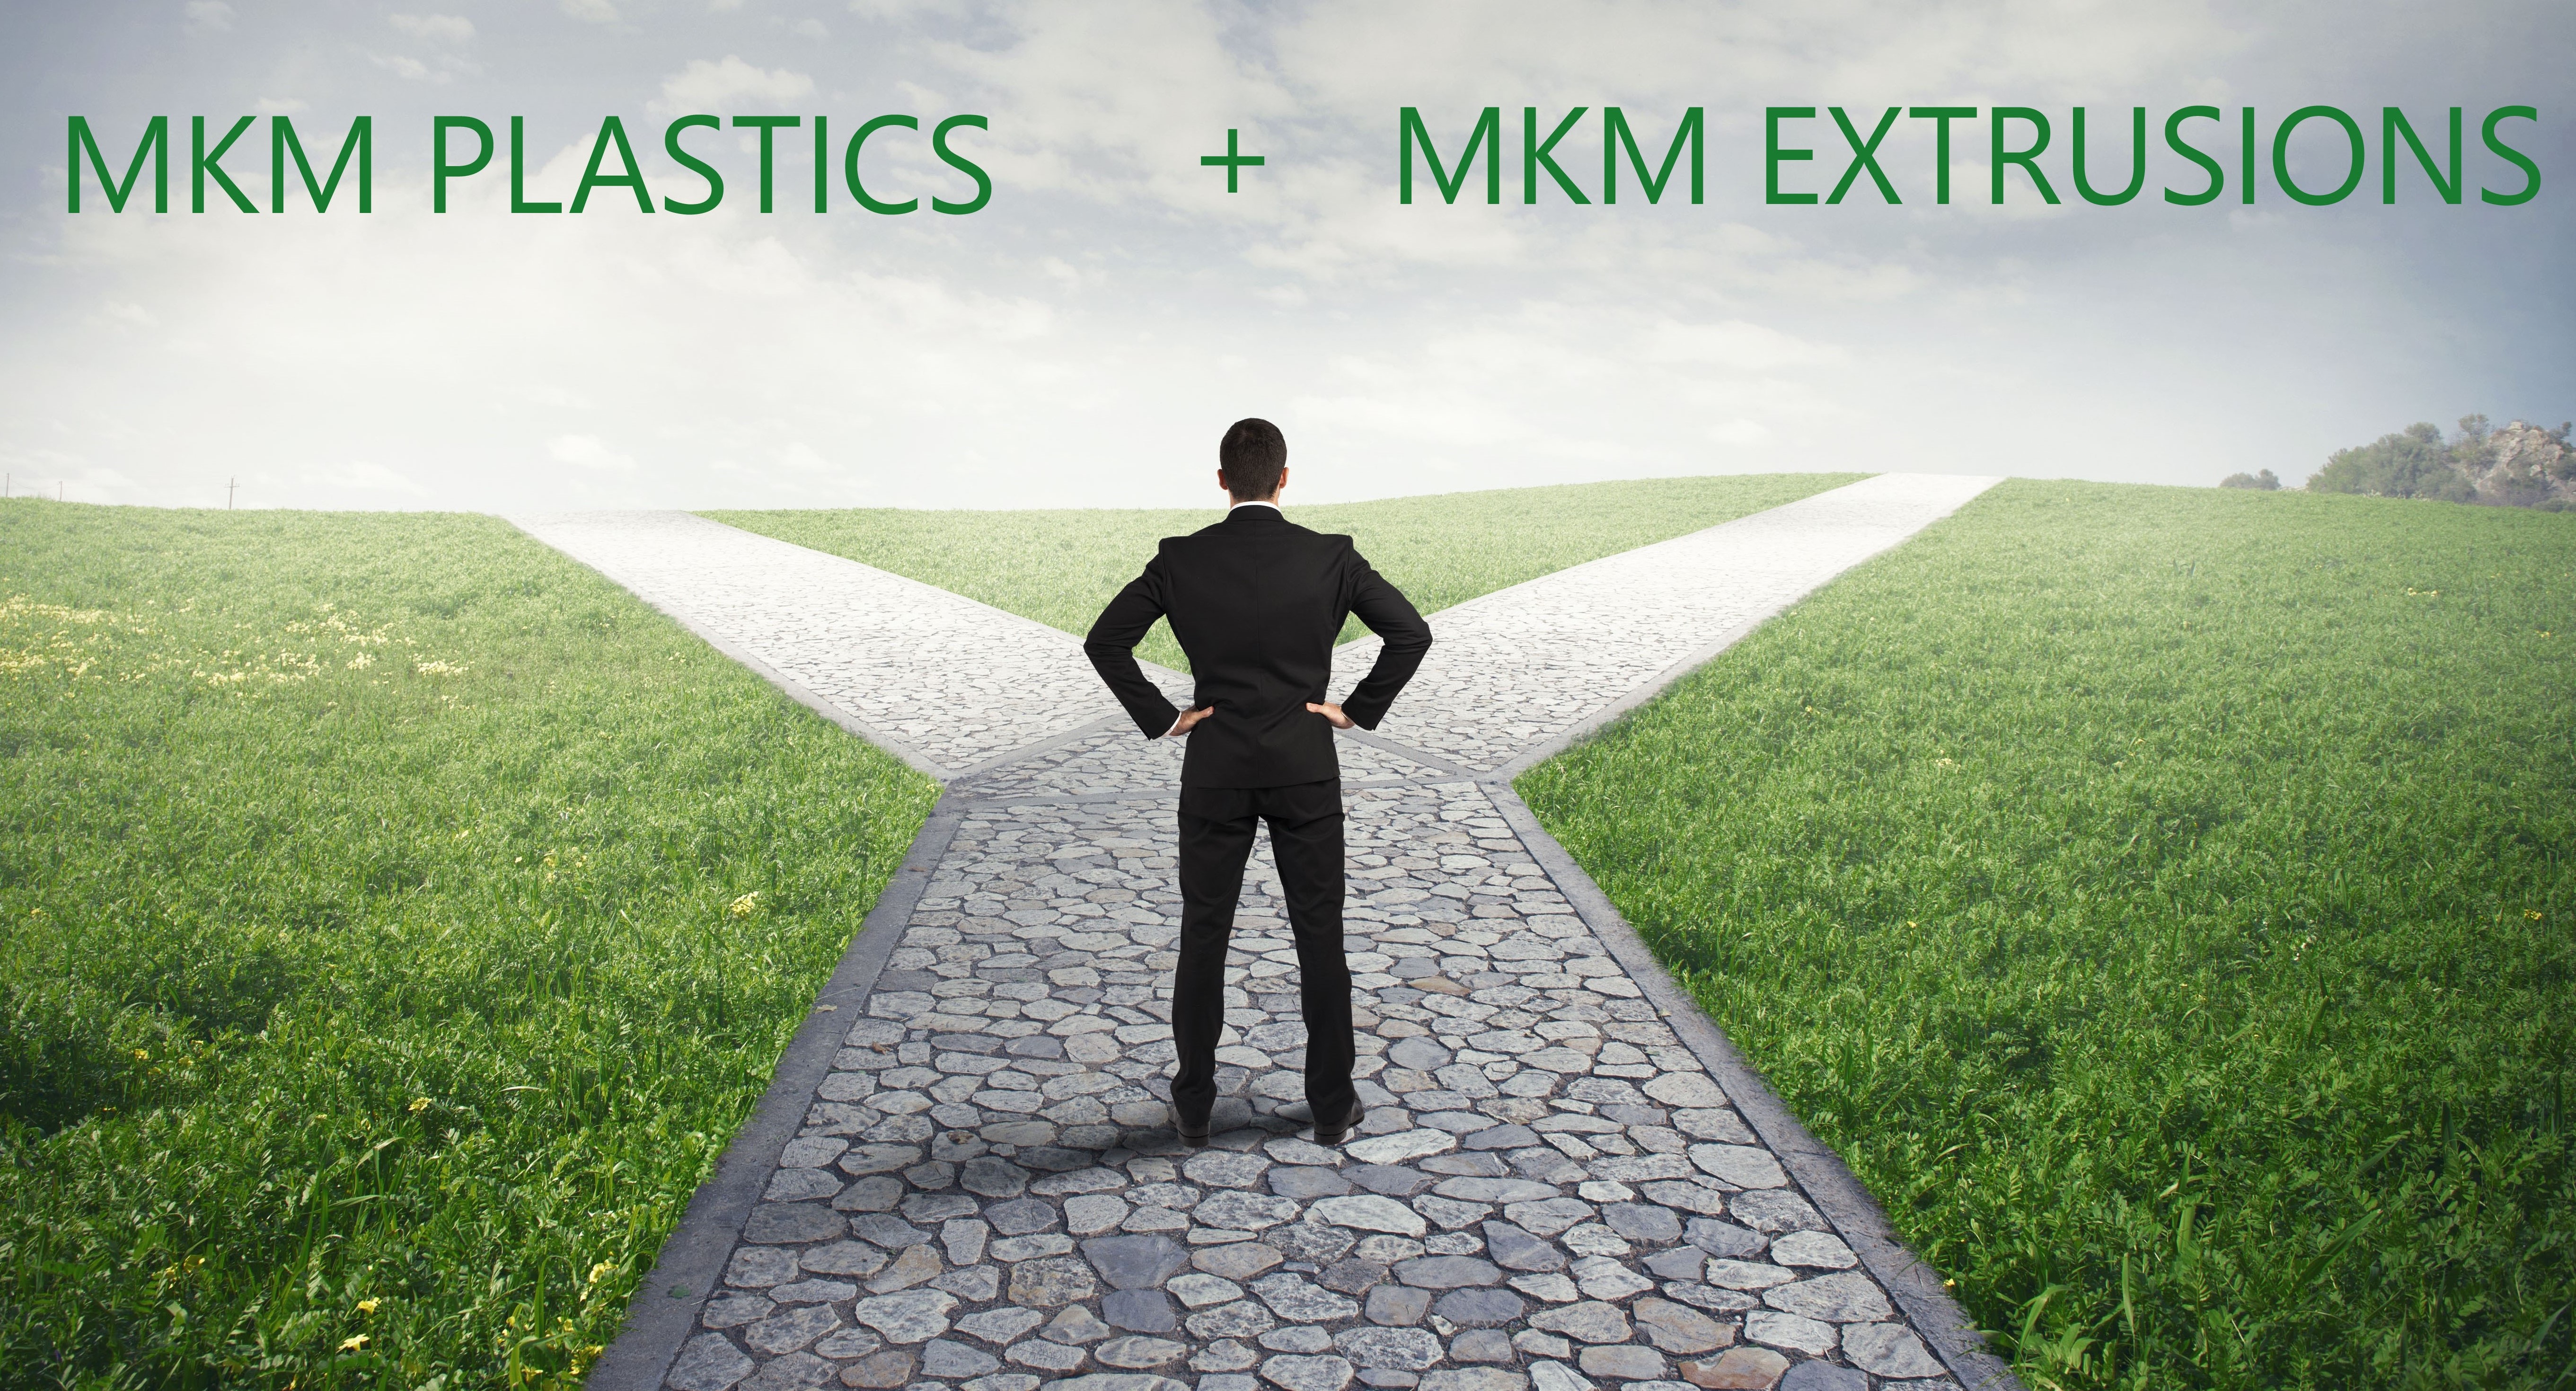 MKM Plastics + MKM Extrusions - Why Are We Known As Both?